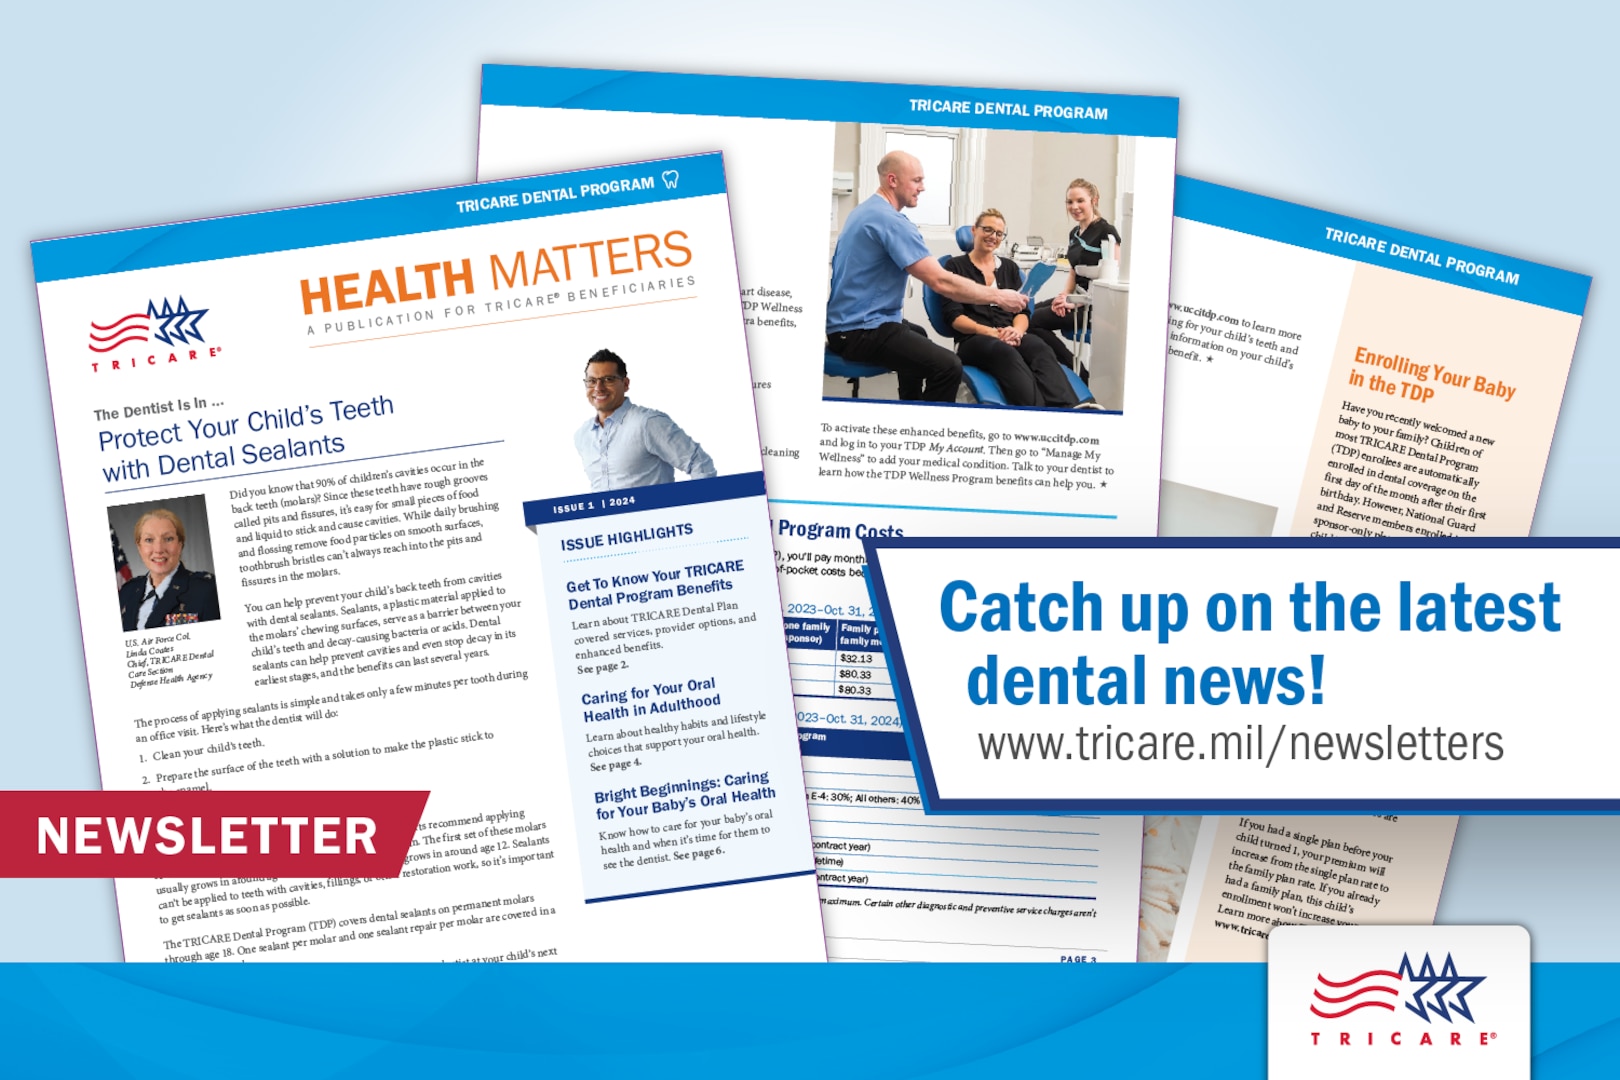 Screenshots of the latest issue of the TRICARE Health Matters Dental Newsletter. Callout box with text says, "Catch up on the latest dental news! www.tricare.mil/newsletters"